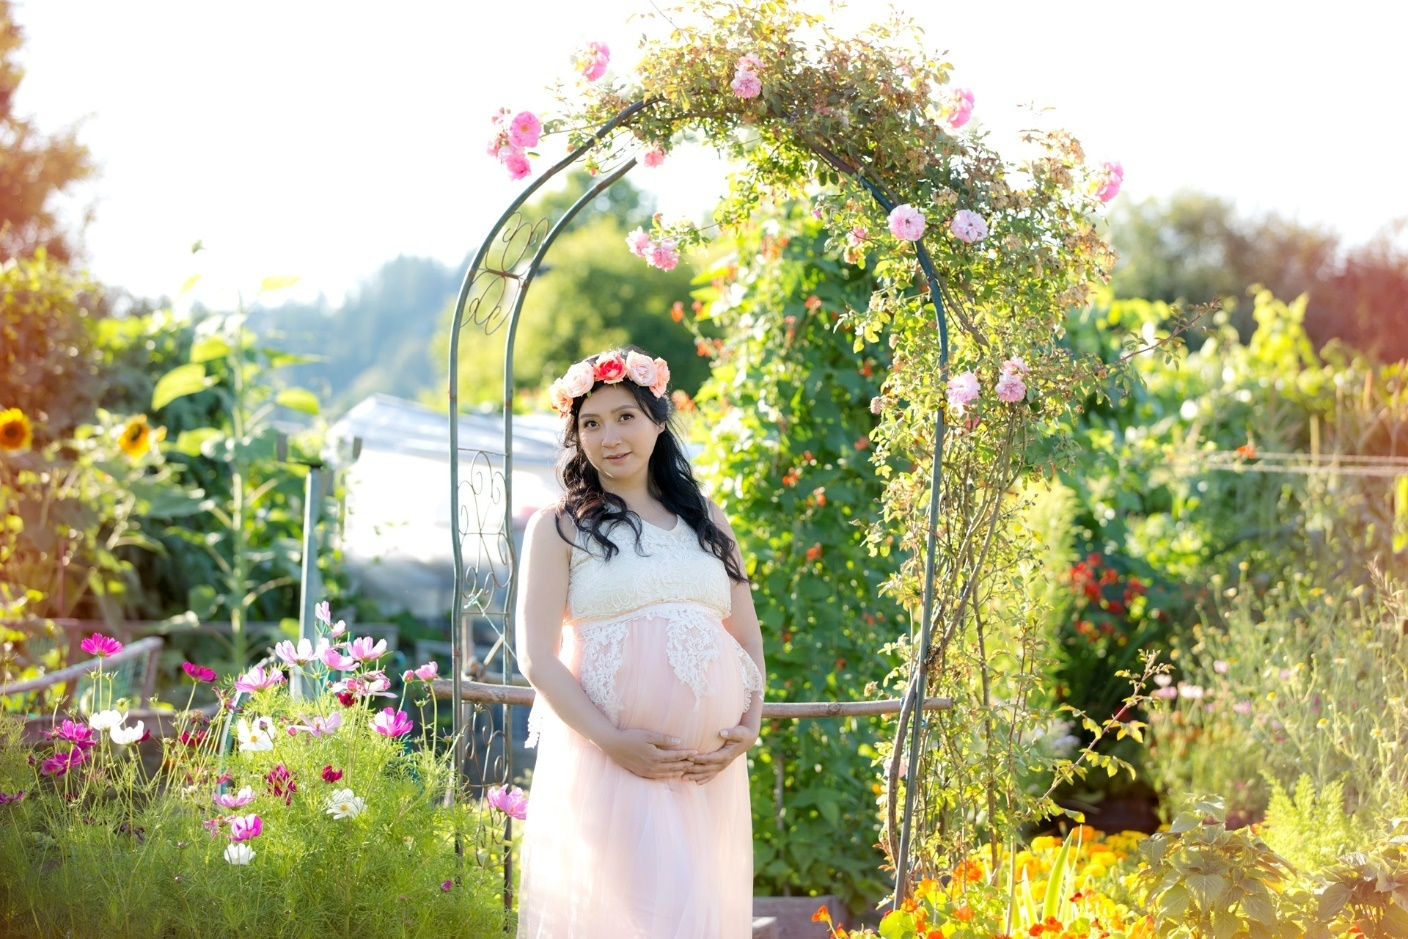 A picture of a woman standing in front of a flower arch